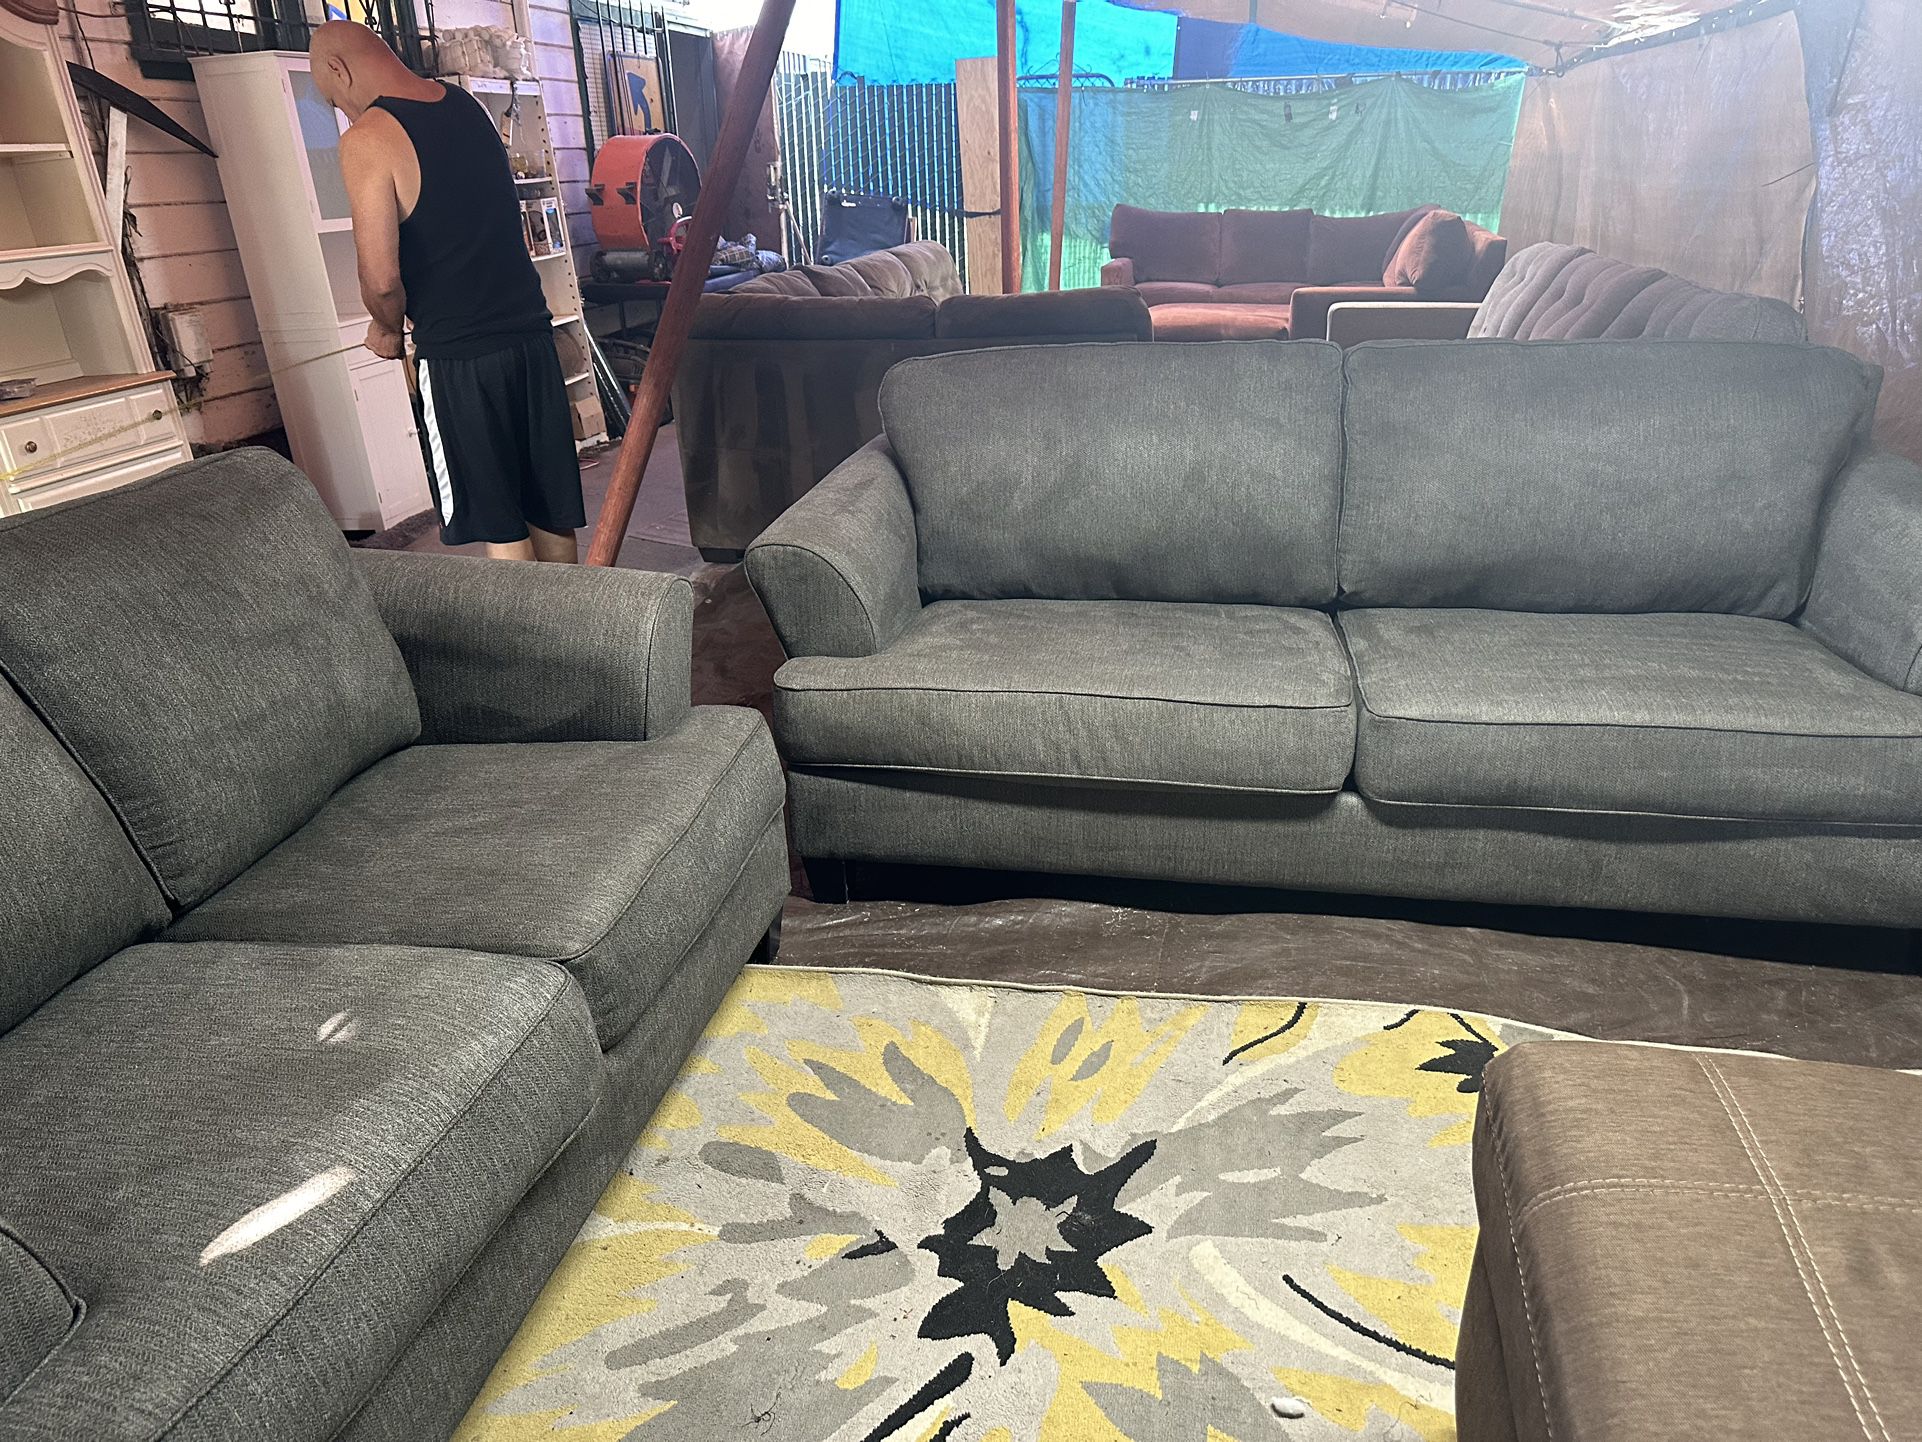 Gray Couch And Loveseat Sectional 275 Each Delivery 40 Dollars Local